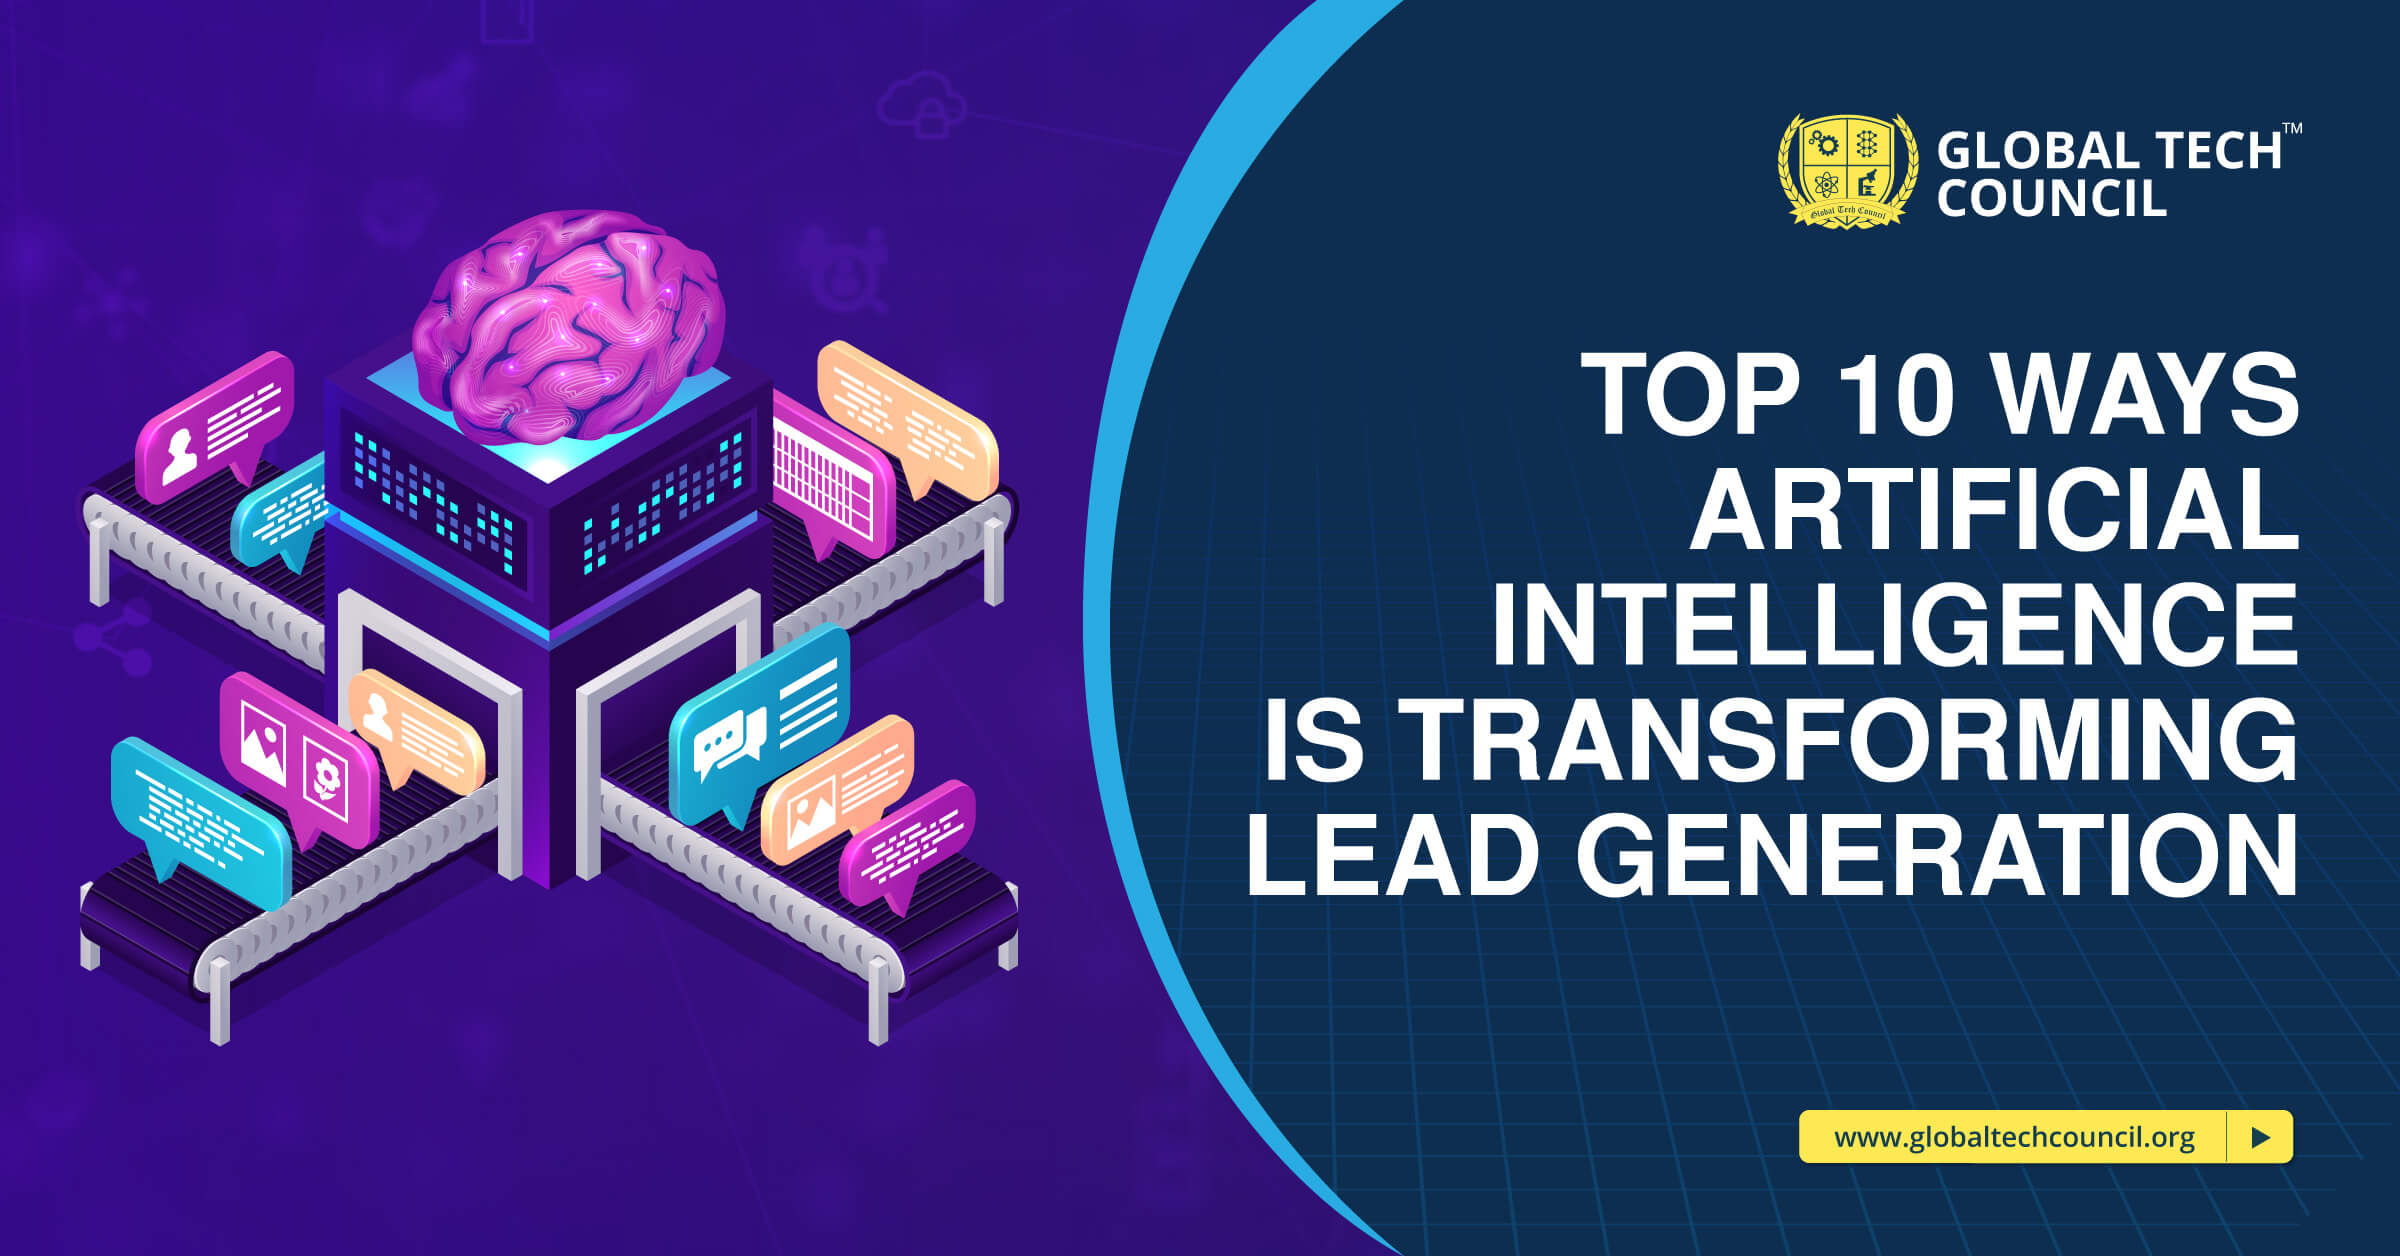 Top 10 Ways Artificial Intelligence is Transforming Lead Generation (1)